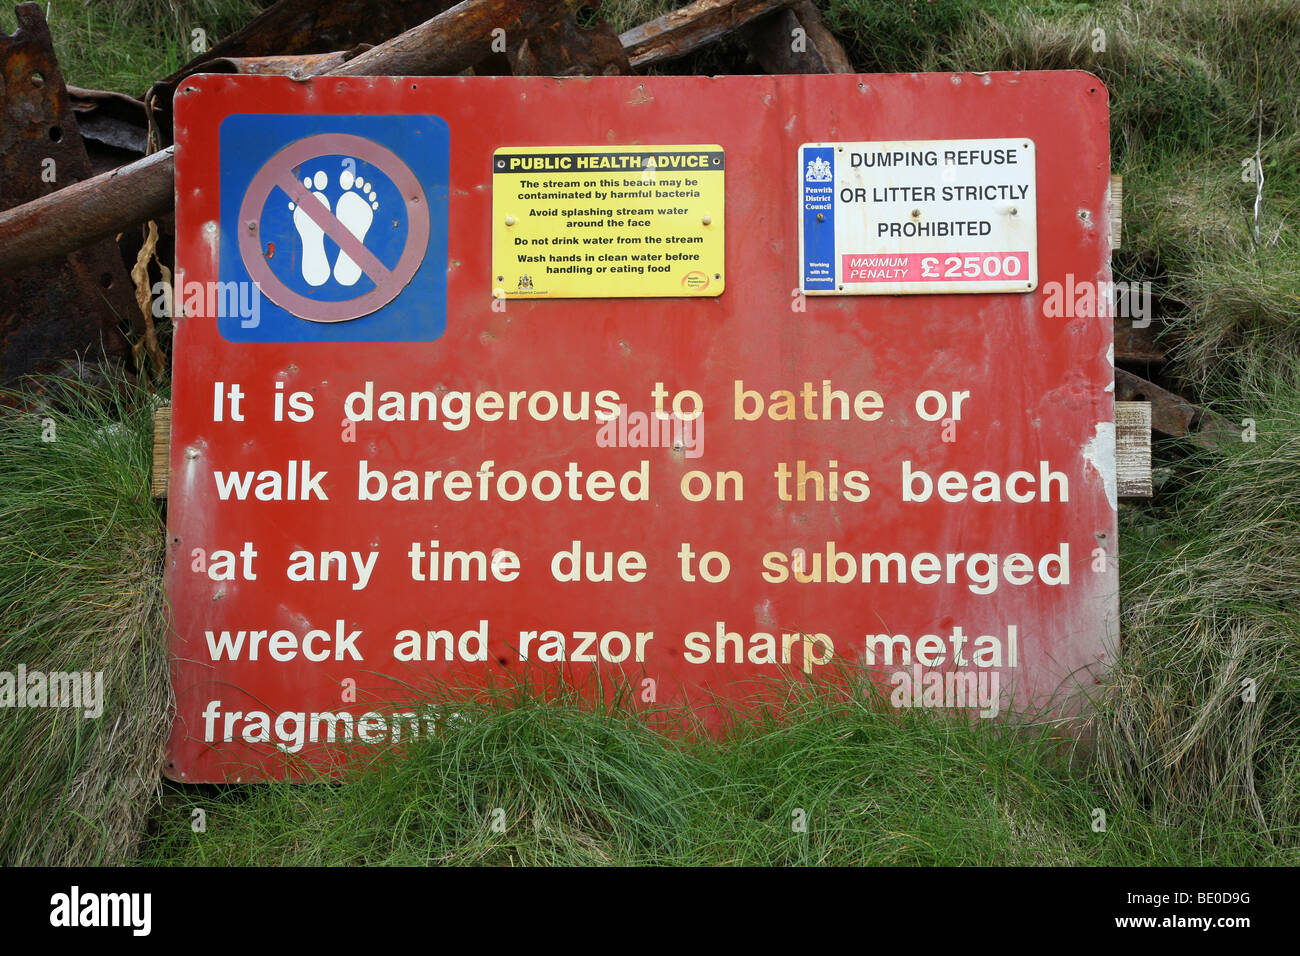 A sign on a beach saying it is dangerous to bathe or walk barefoot because of a submerged wreck and sharp metal fragments Stock Photo